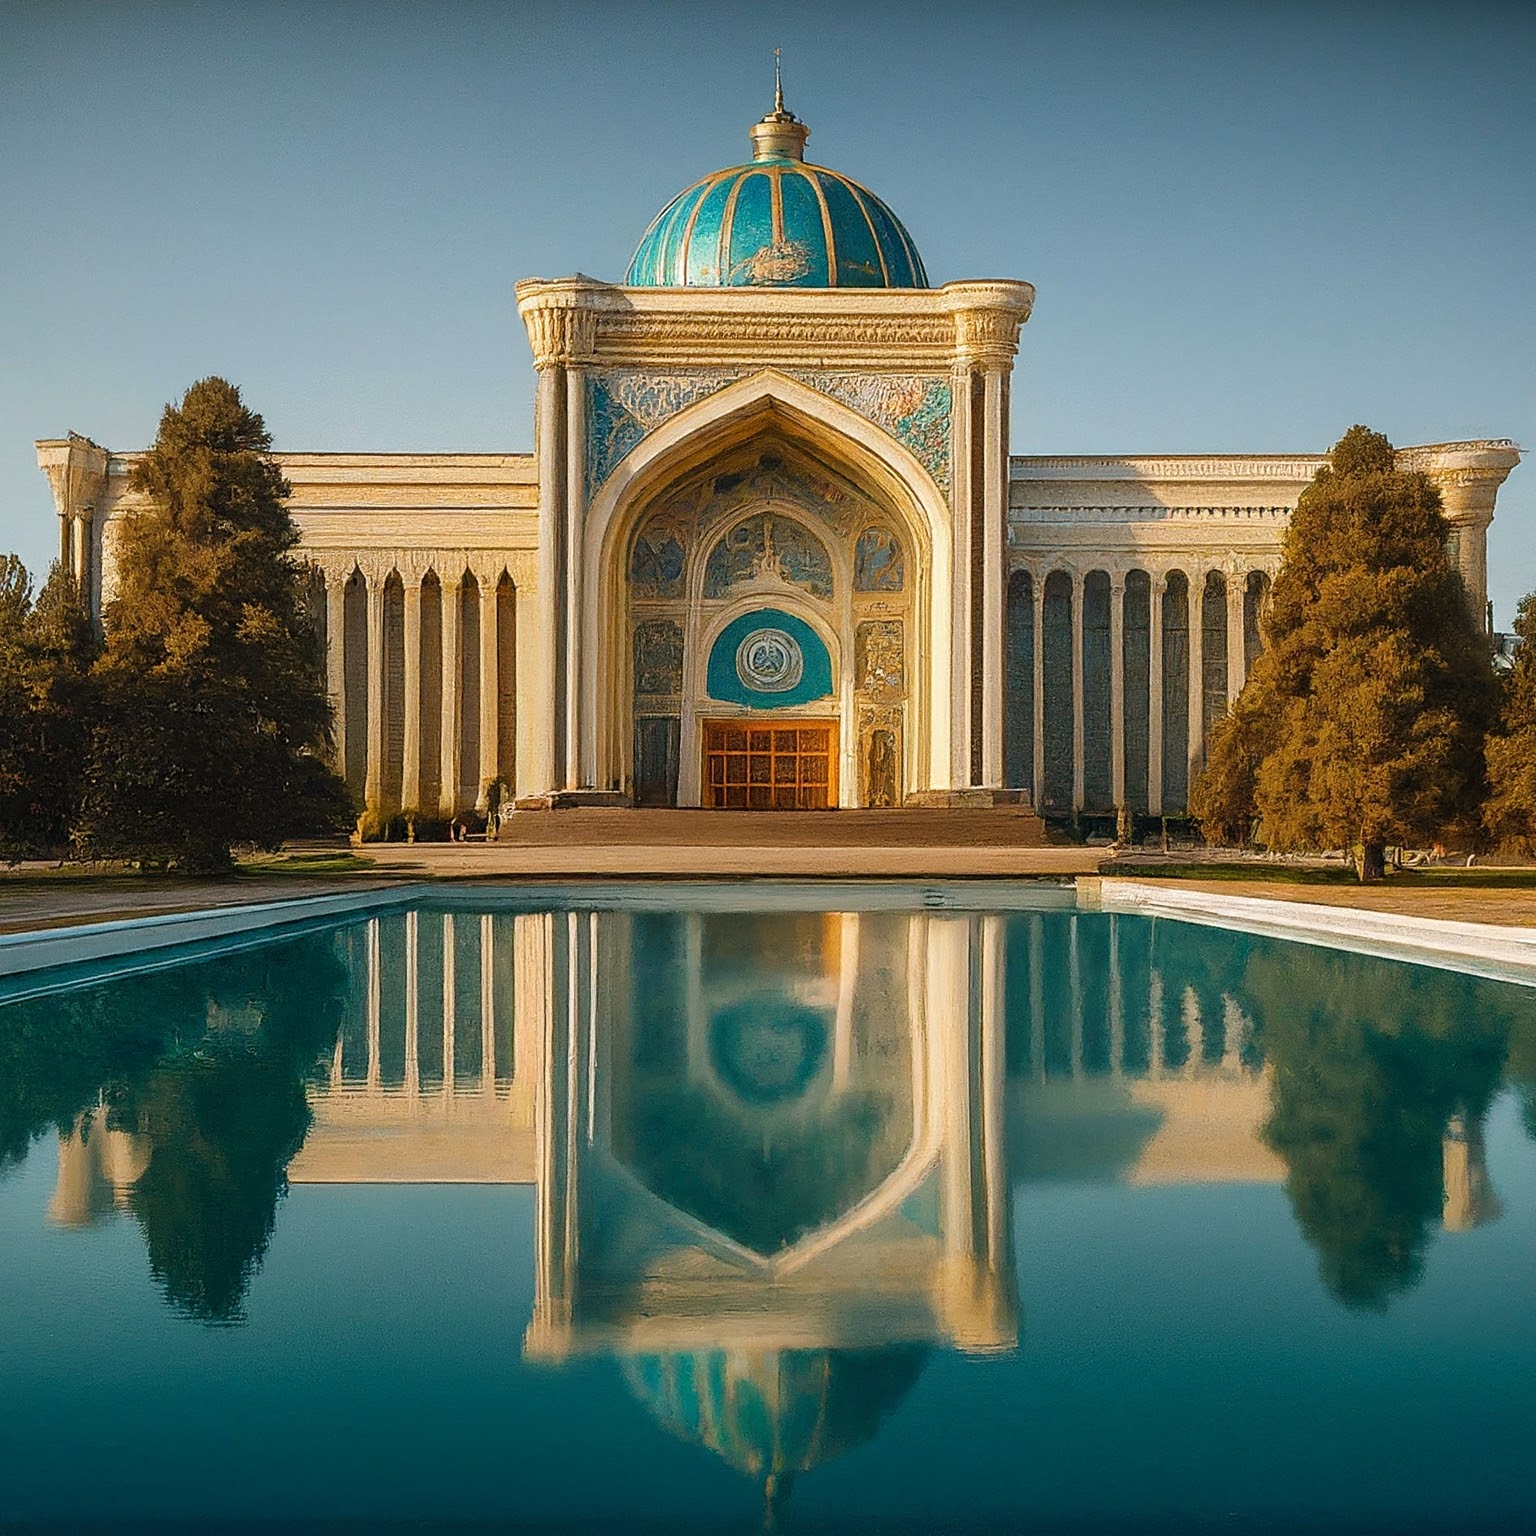 Dushanbe Palace of Culture, Tajikistan, with ornate facade and reflecting pool.